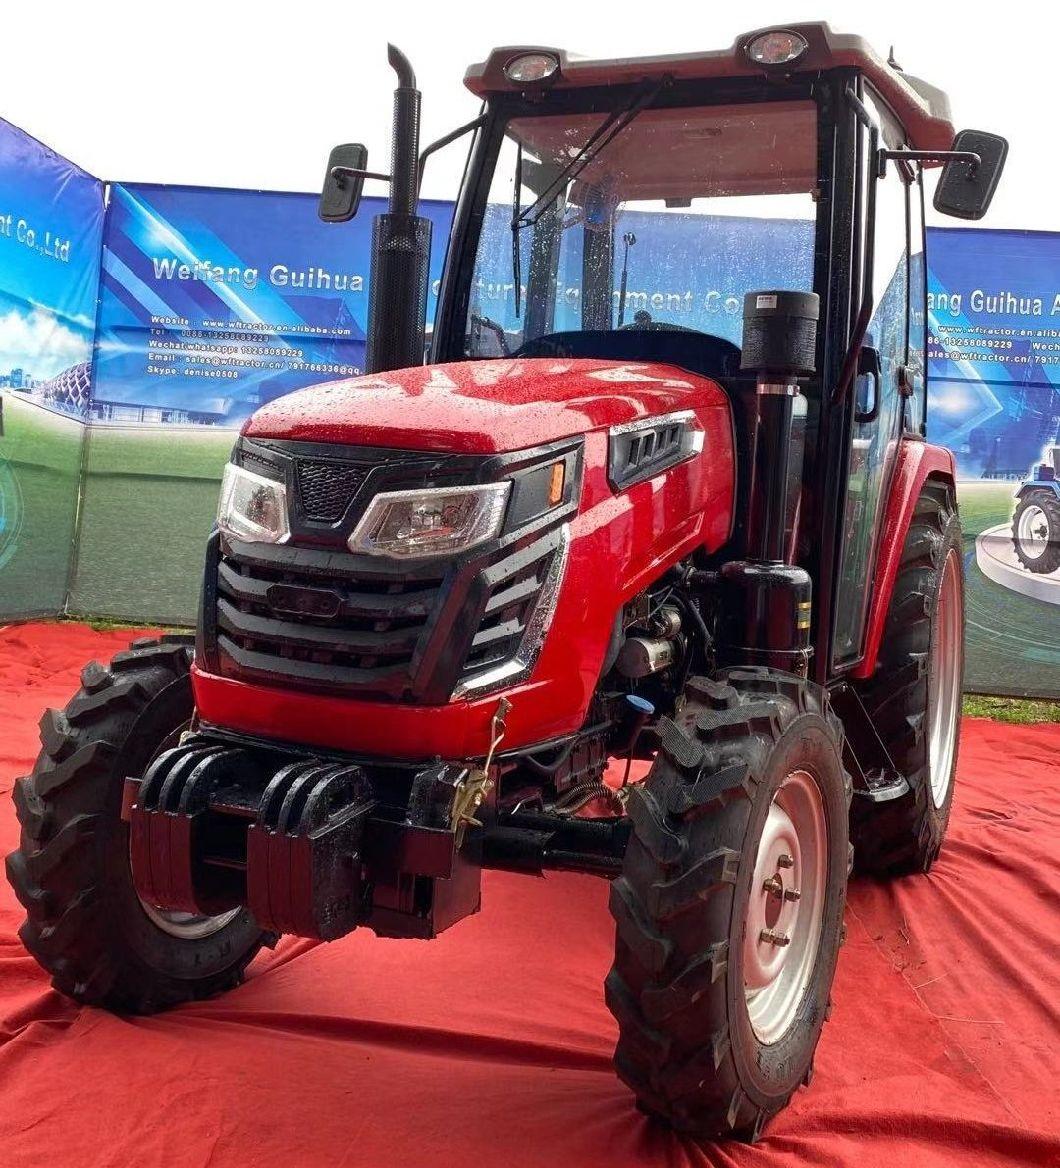 4WD Medium Size Lawn Tractor Compact Small Farm Tractors for Orchard/Greenhouse/Paddy Field/Corn Field